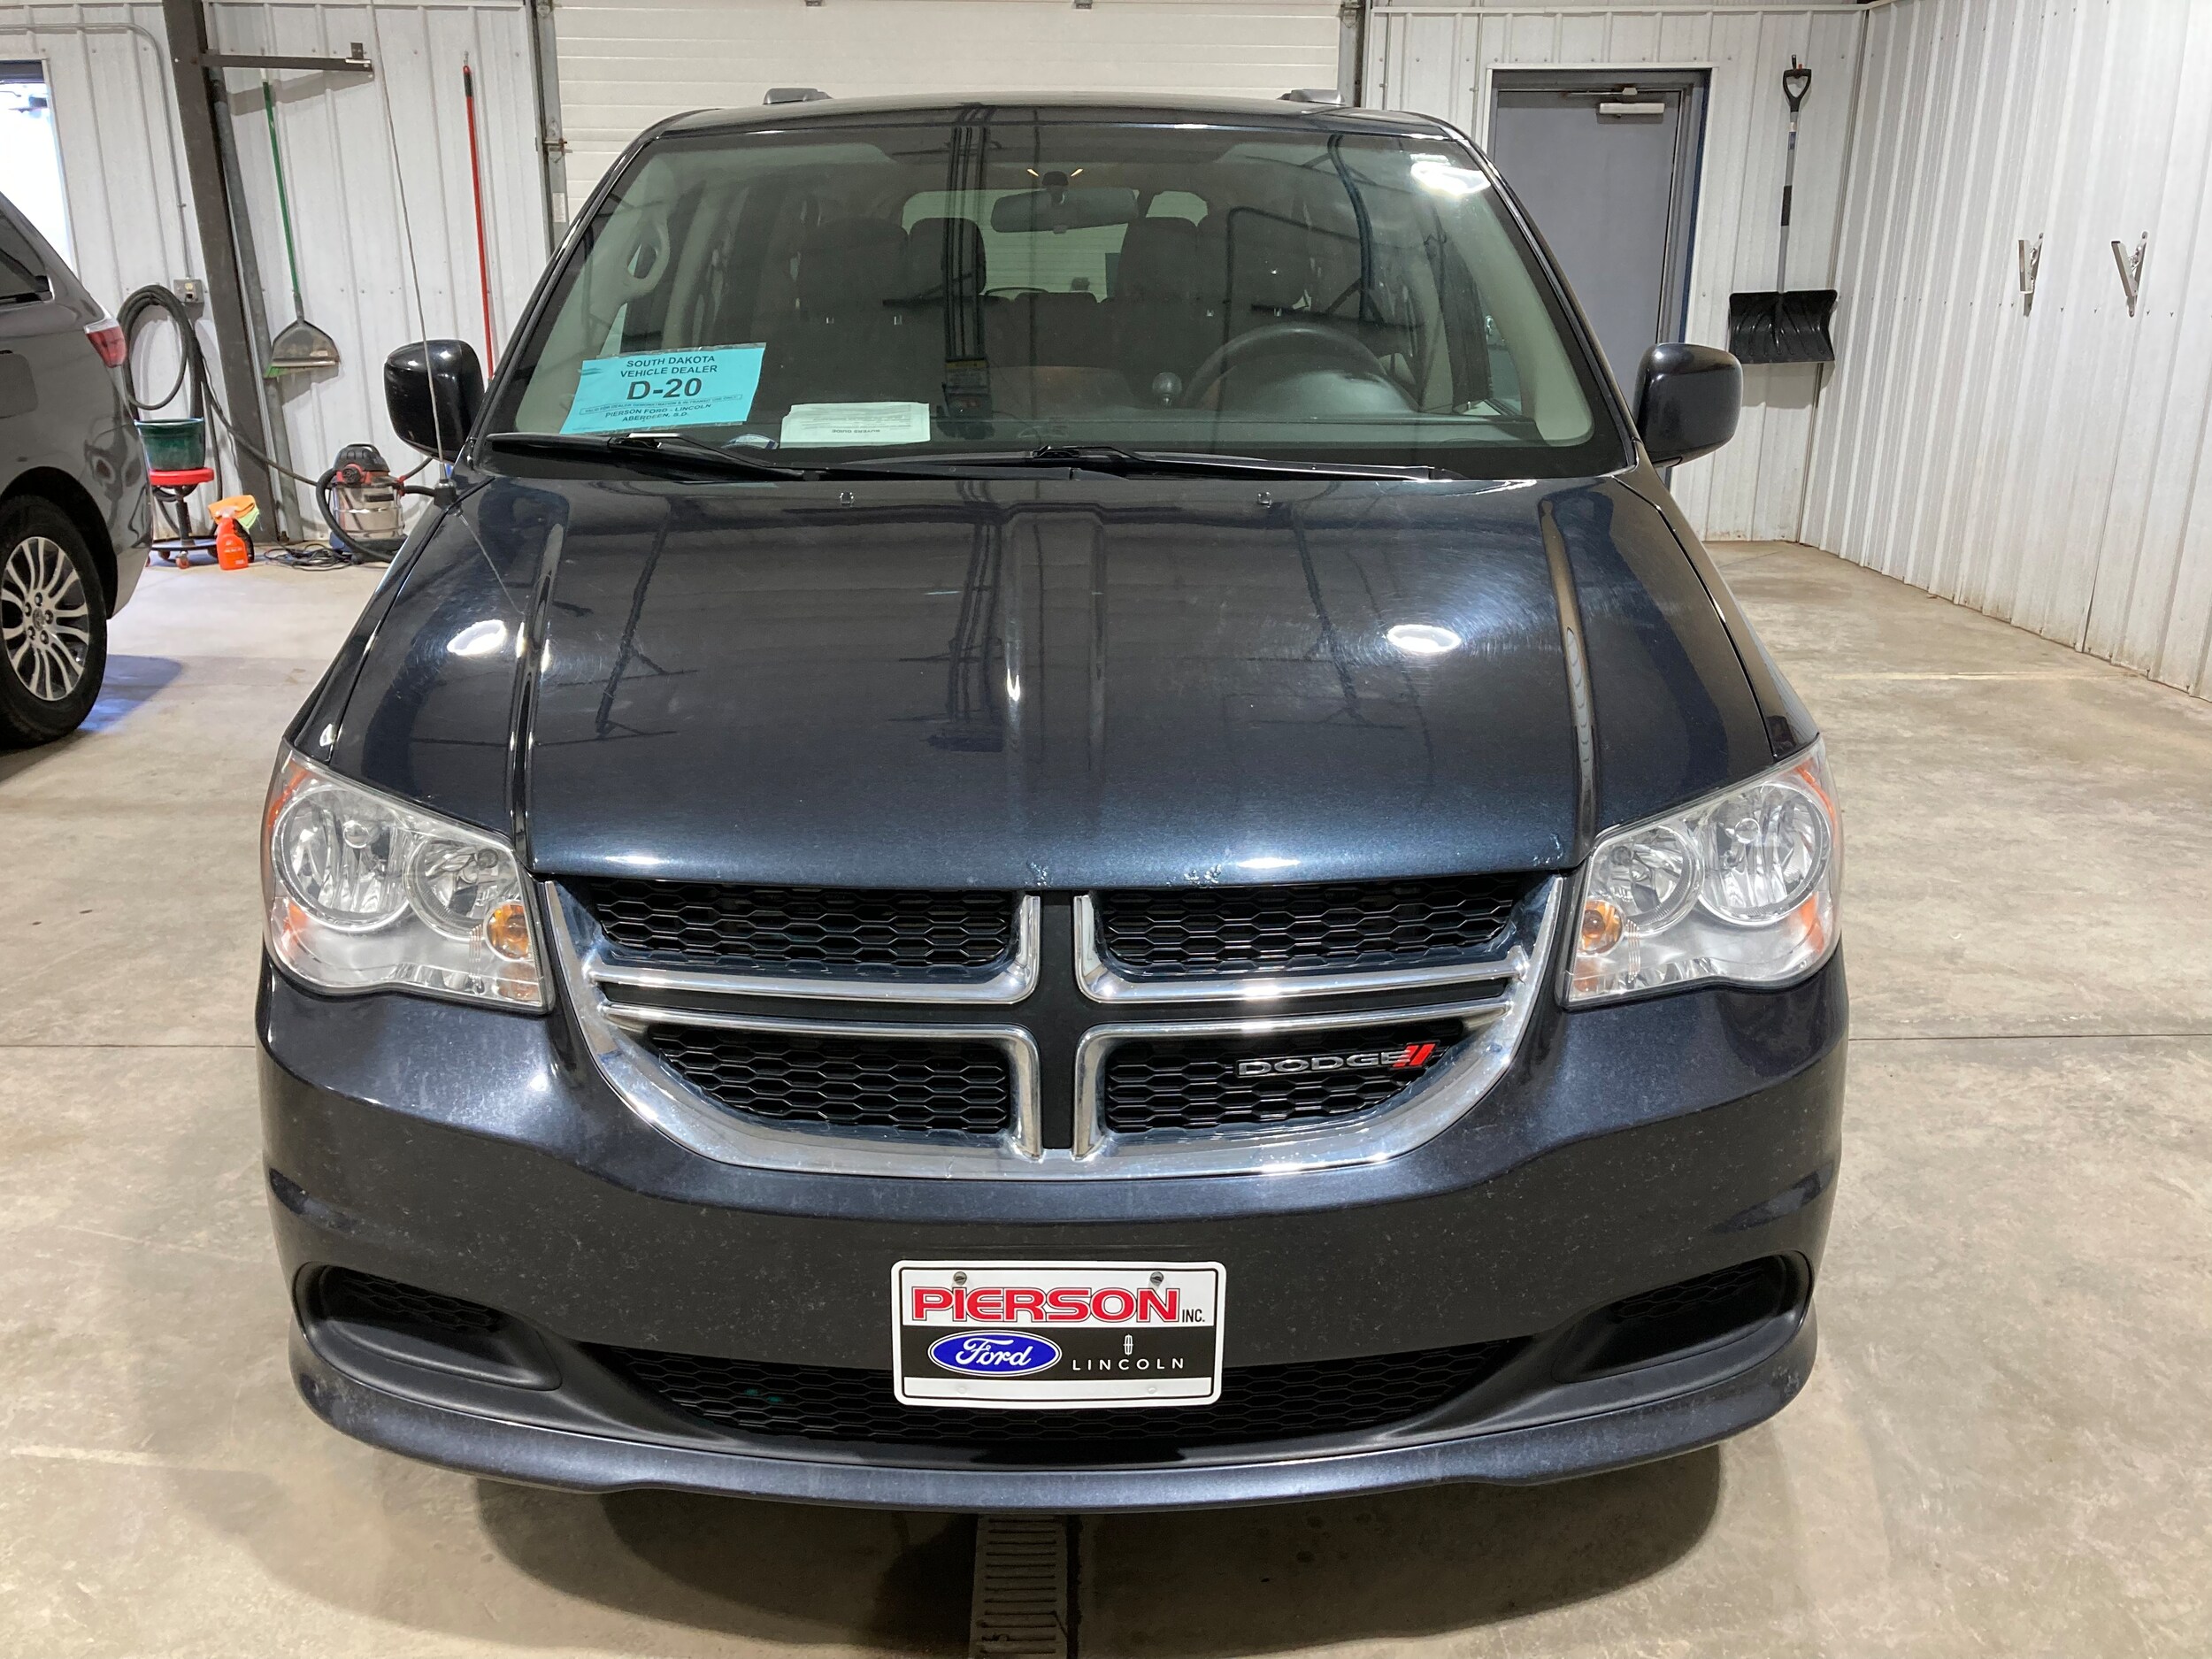 Used 2013 Dodge Grand Caravan SXT with VIN 2C4RDGCG2DR607963 for sale in Aberdeen, SD